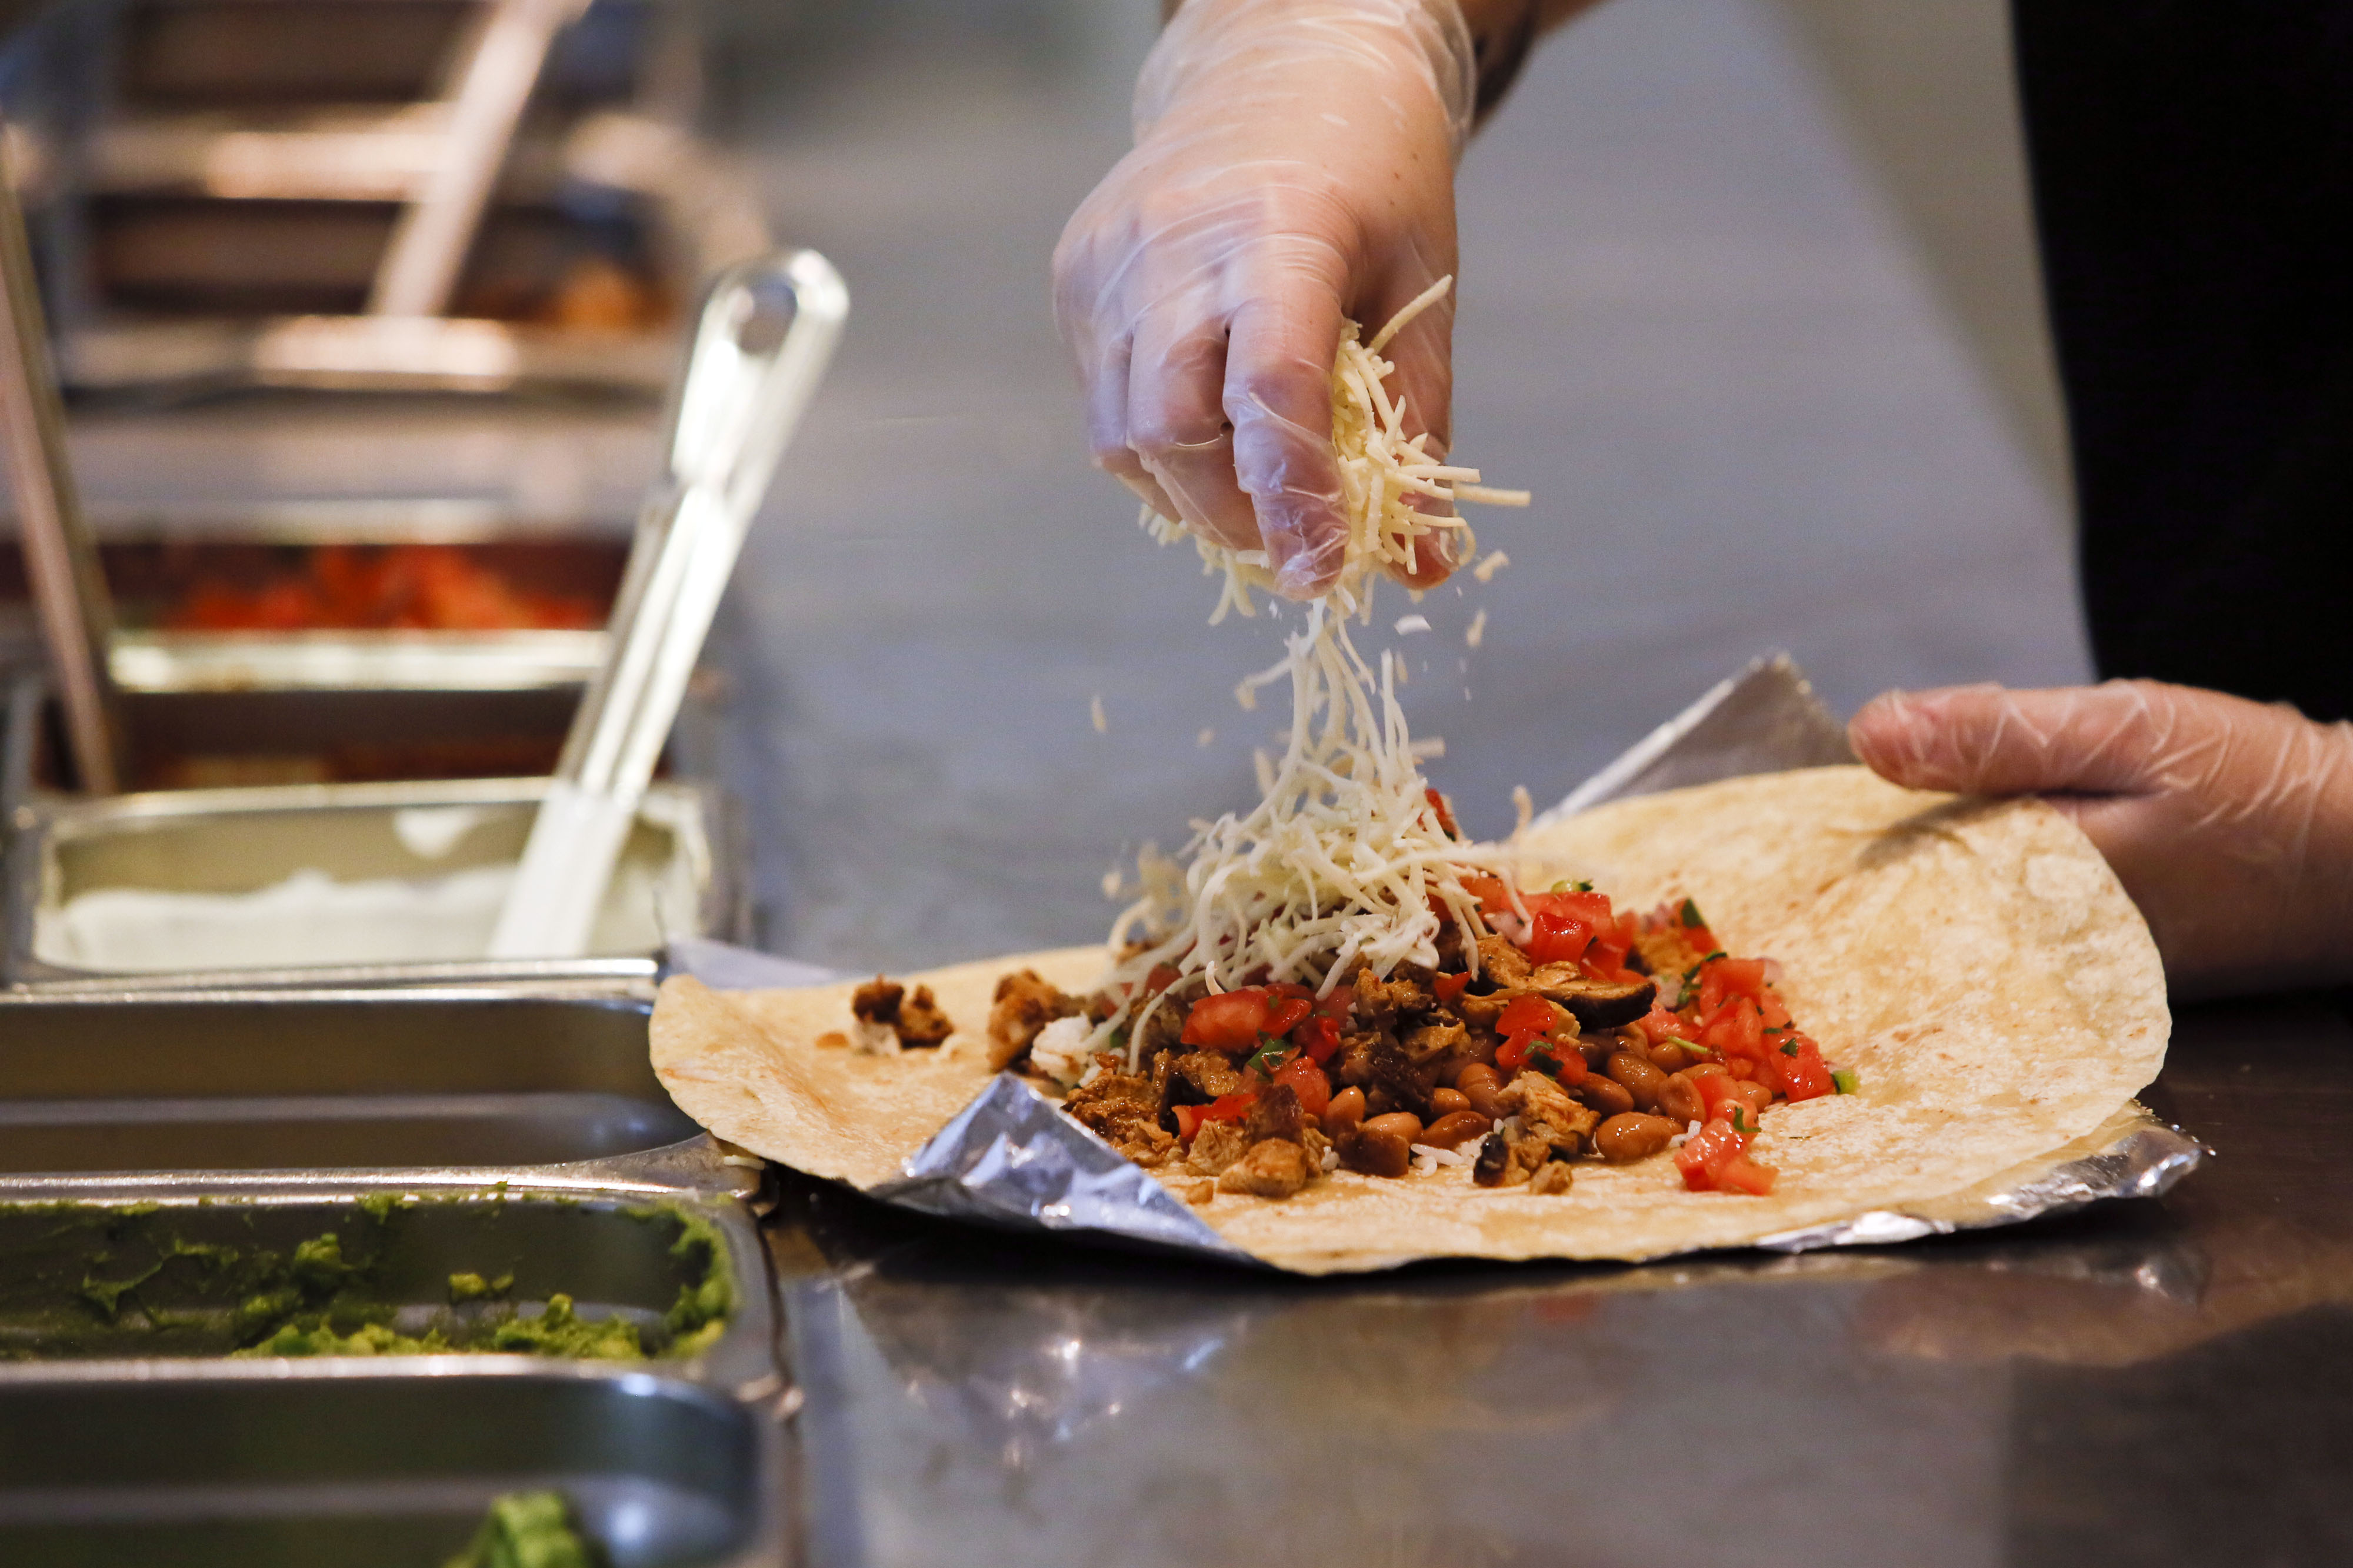 A employee sprinkles cheese on a burrito at a Chipotle restaurant in Hollywood, on July 16, 2013. (Patrick T. Fallon—Bloomberg/Getty Images)